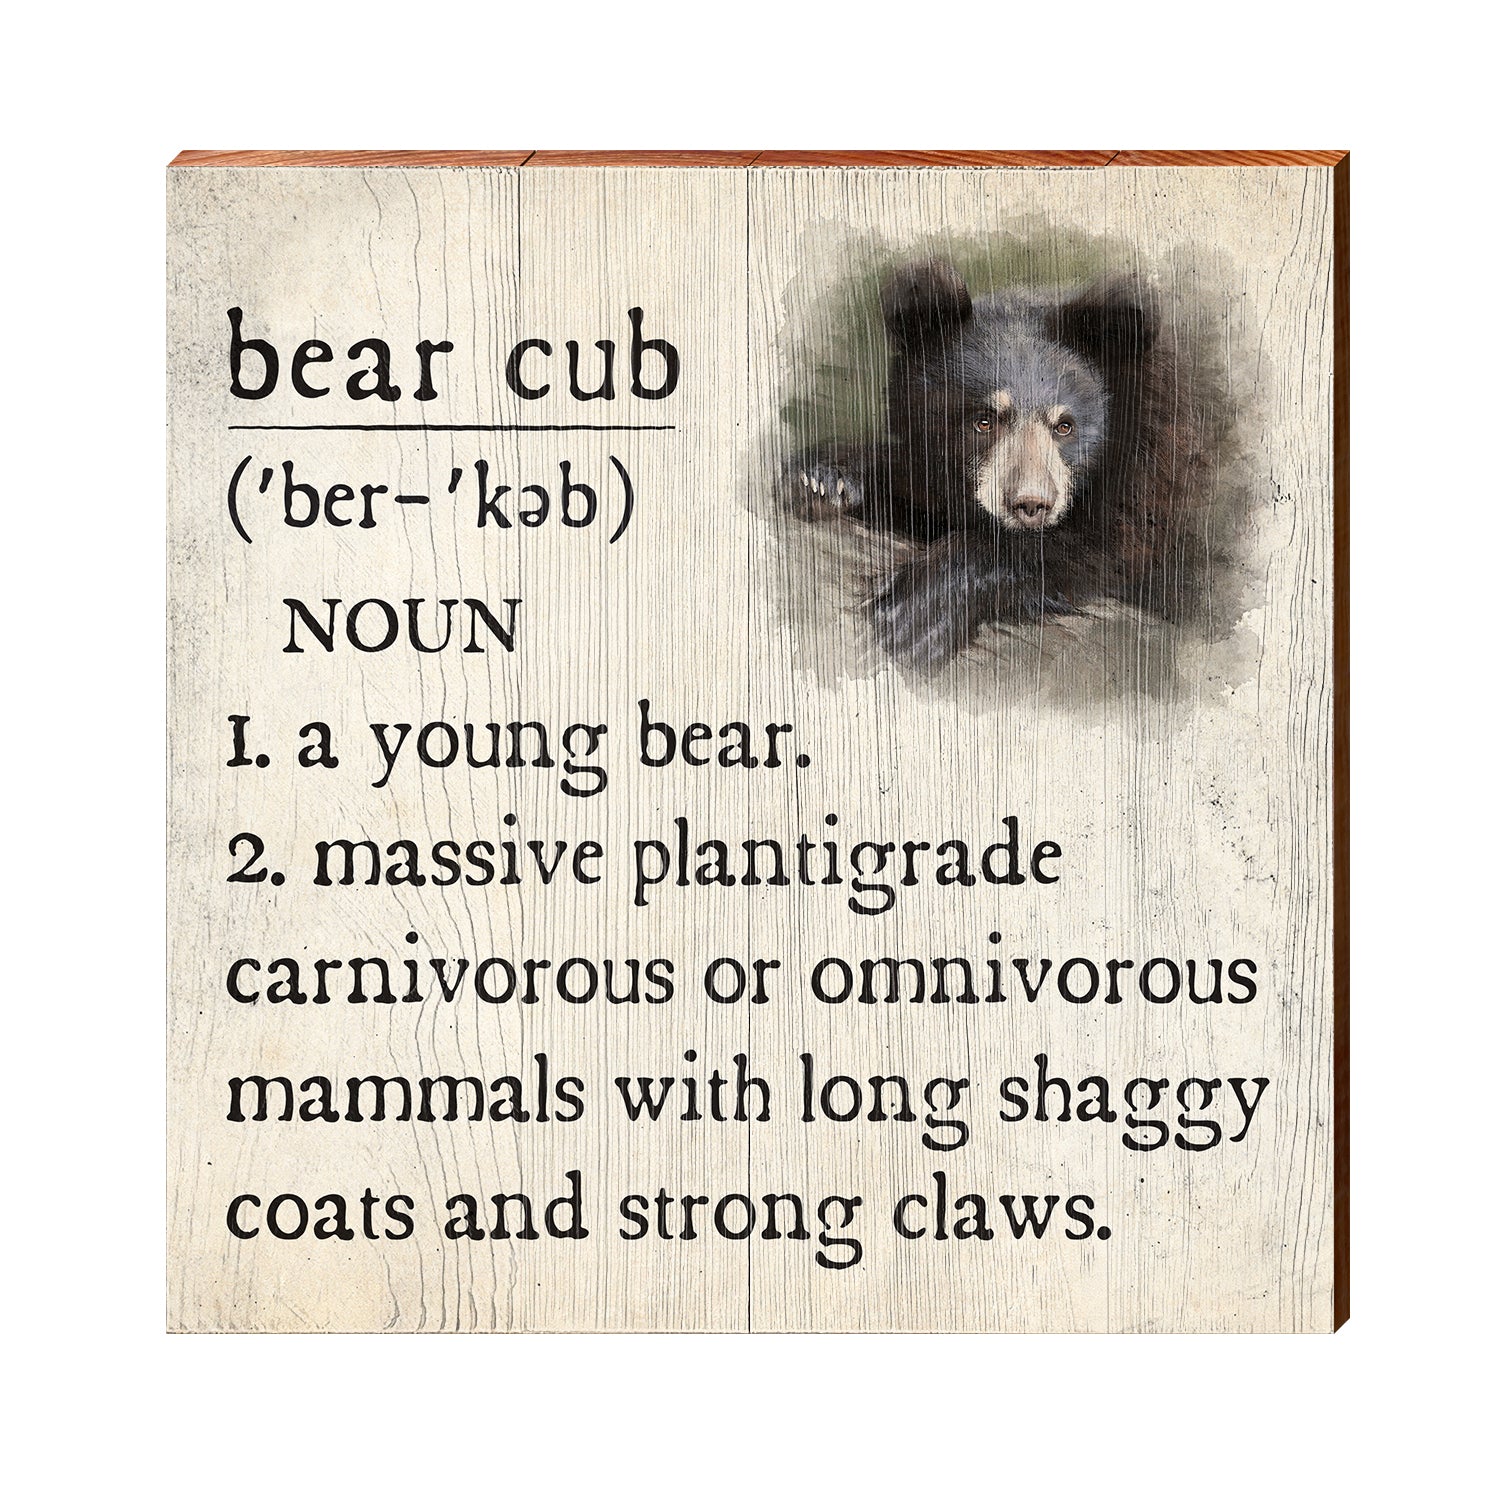 Bear Definition & Meaning